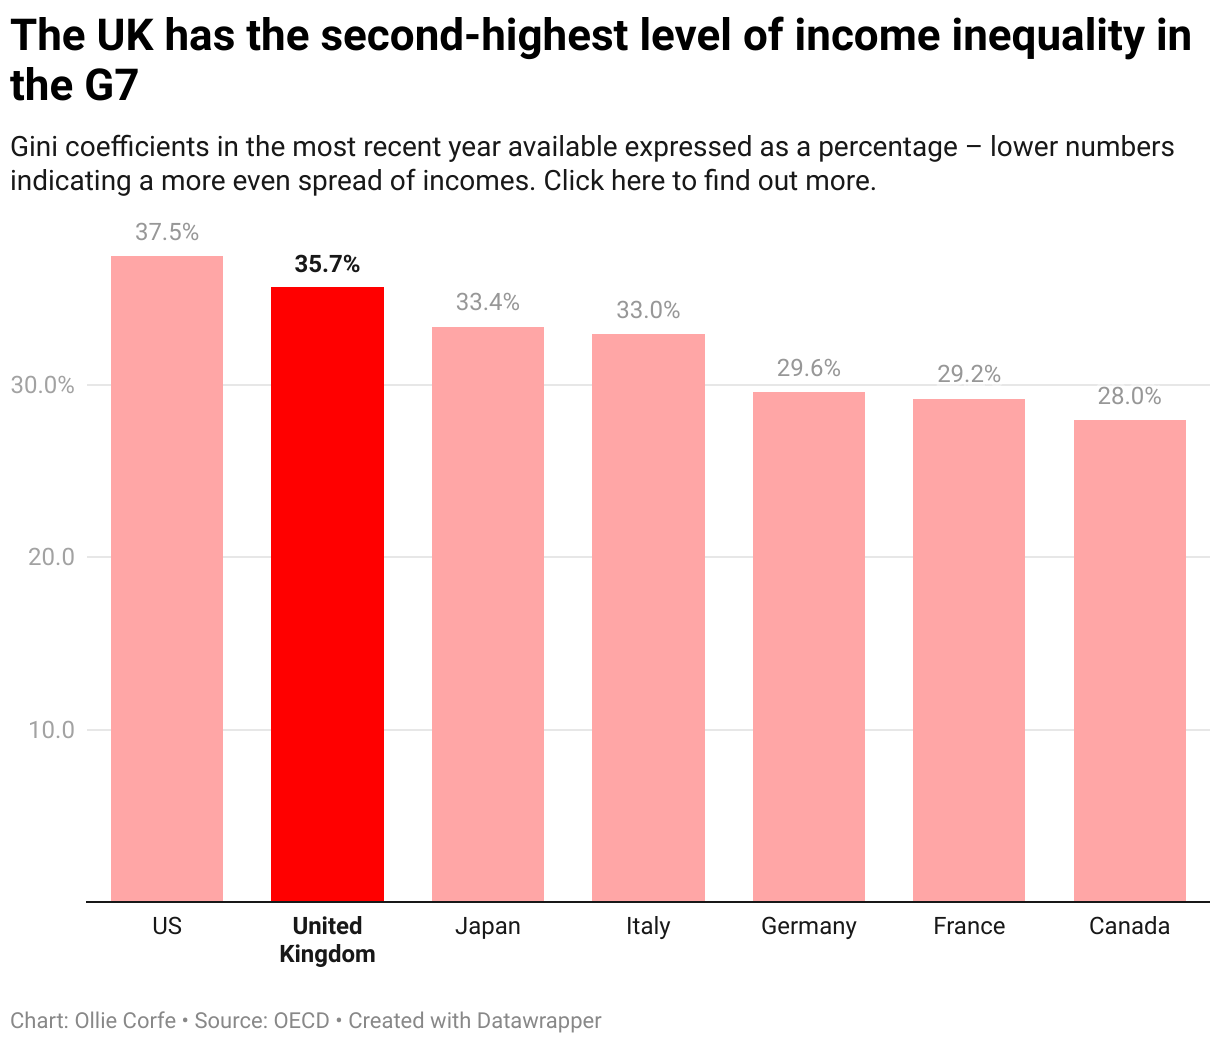 Column chart comparing Gini inequality coefficients between UK countries.